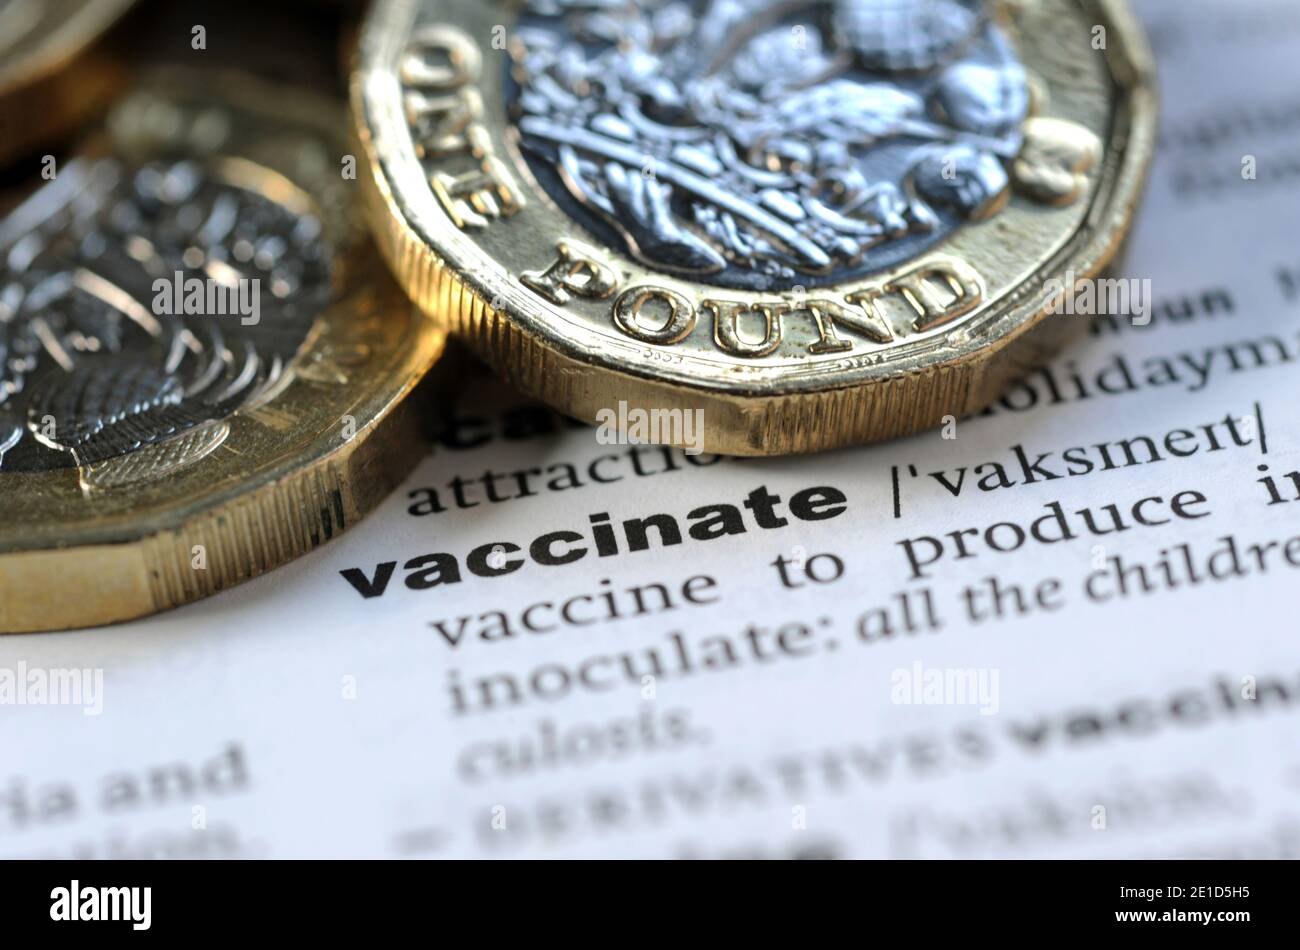 DICTIONARY DEFINITION OF VACCINATE WITH ONE POUND COINS RE COVID 19 CORONAVIRUS VIRUSES COST ETC UK Stock Photo